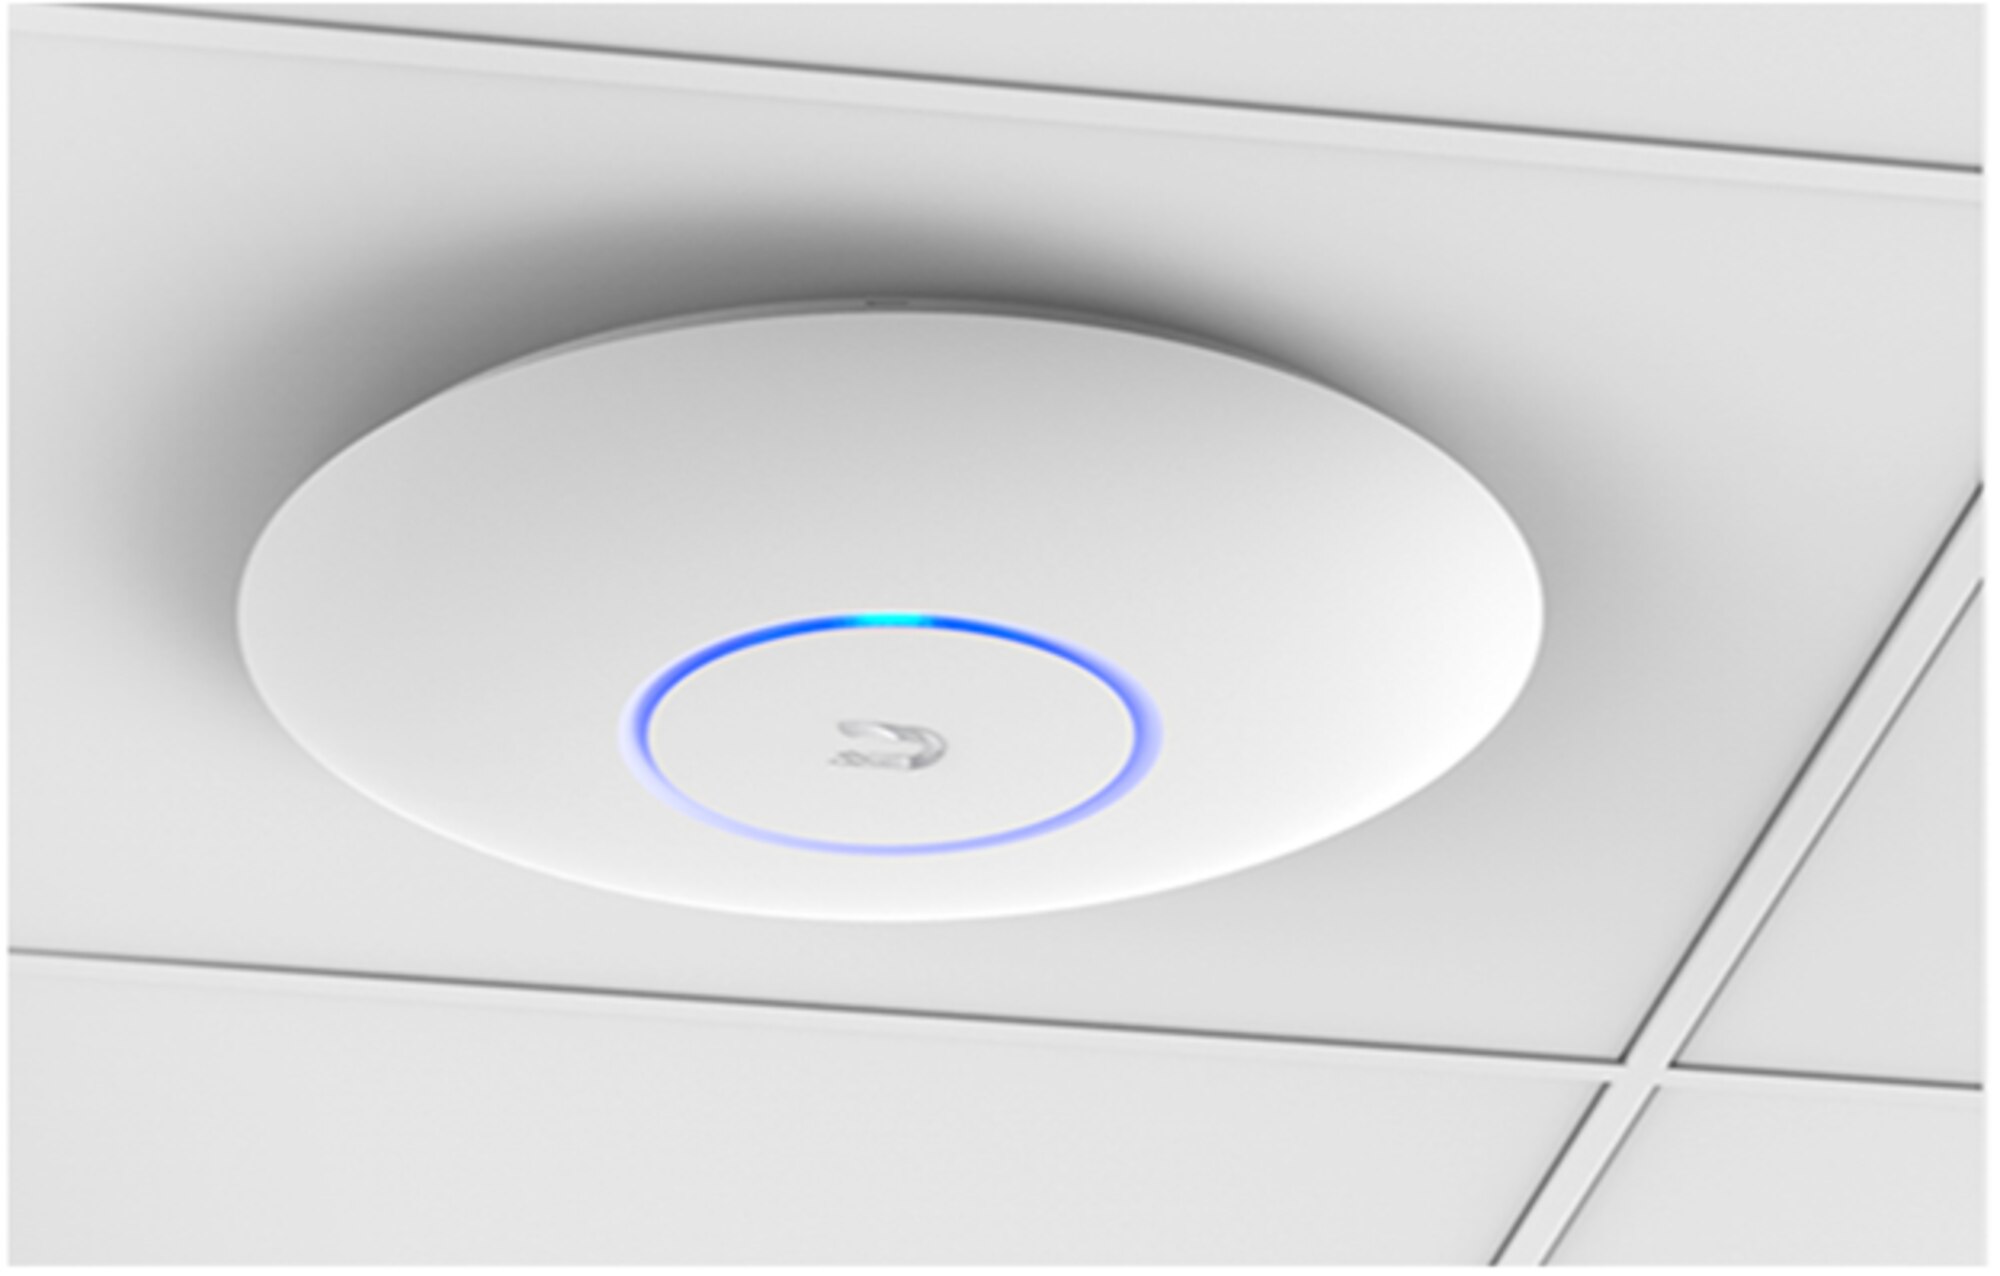 The network device is white in color with a blue circle in the middle